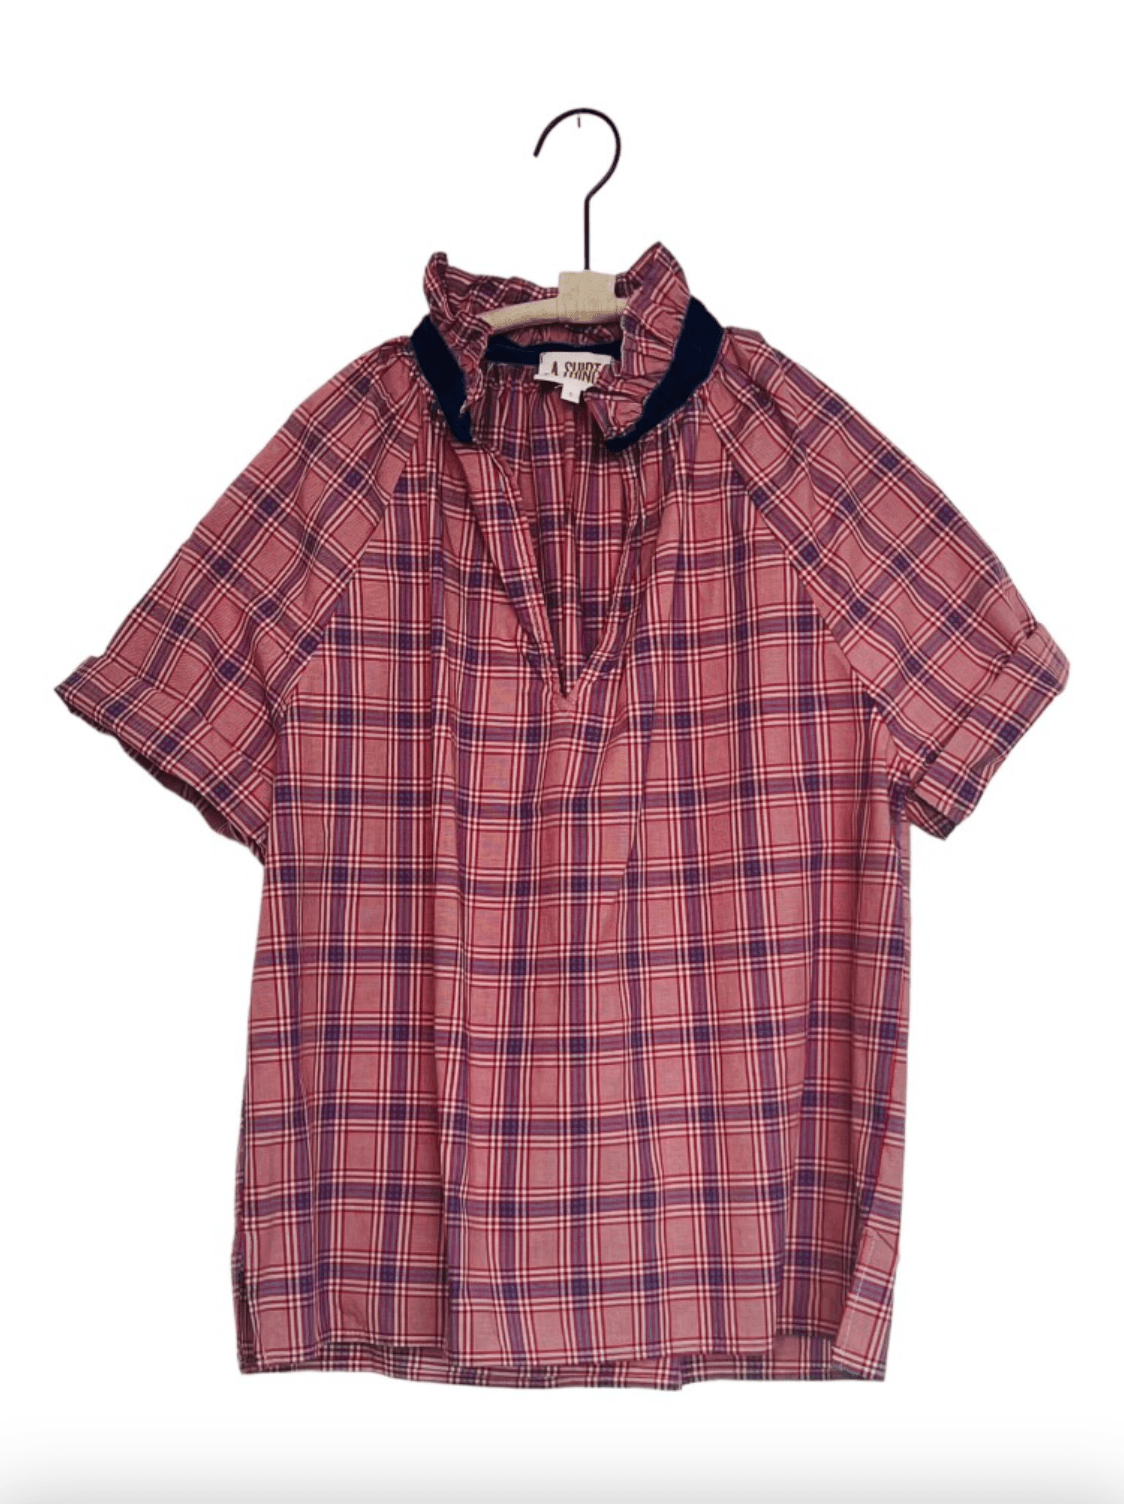 Margot Plaid Top in Red Plaid by A Shirt Thing - Haven